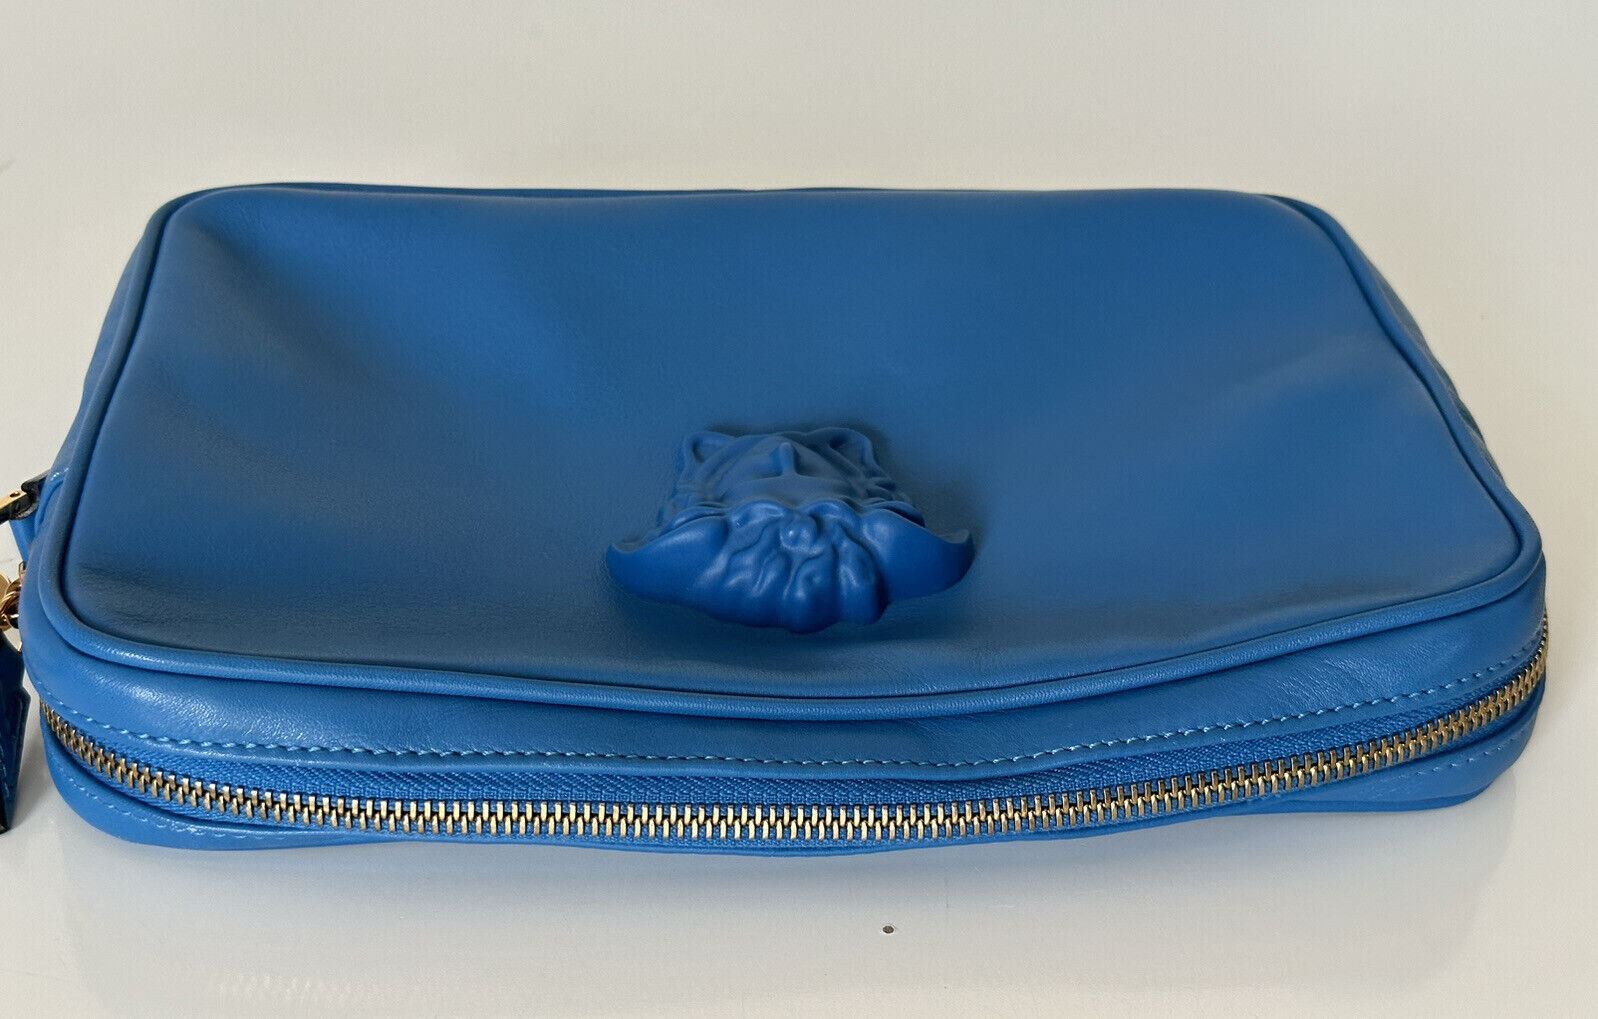 NWT $1125 Versace Medusa Head Leather Blue Clutch Bag DP88507 Made in Italy